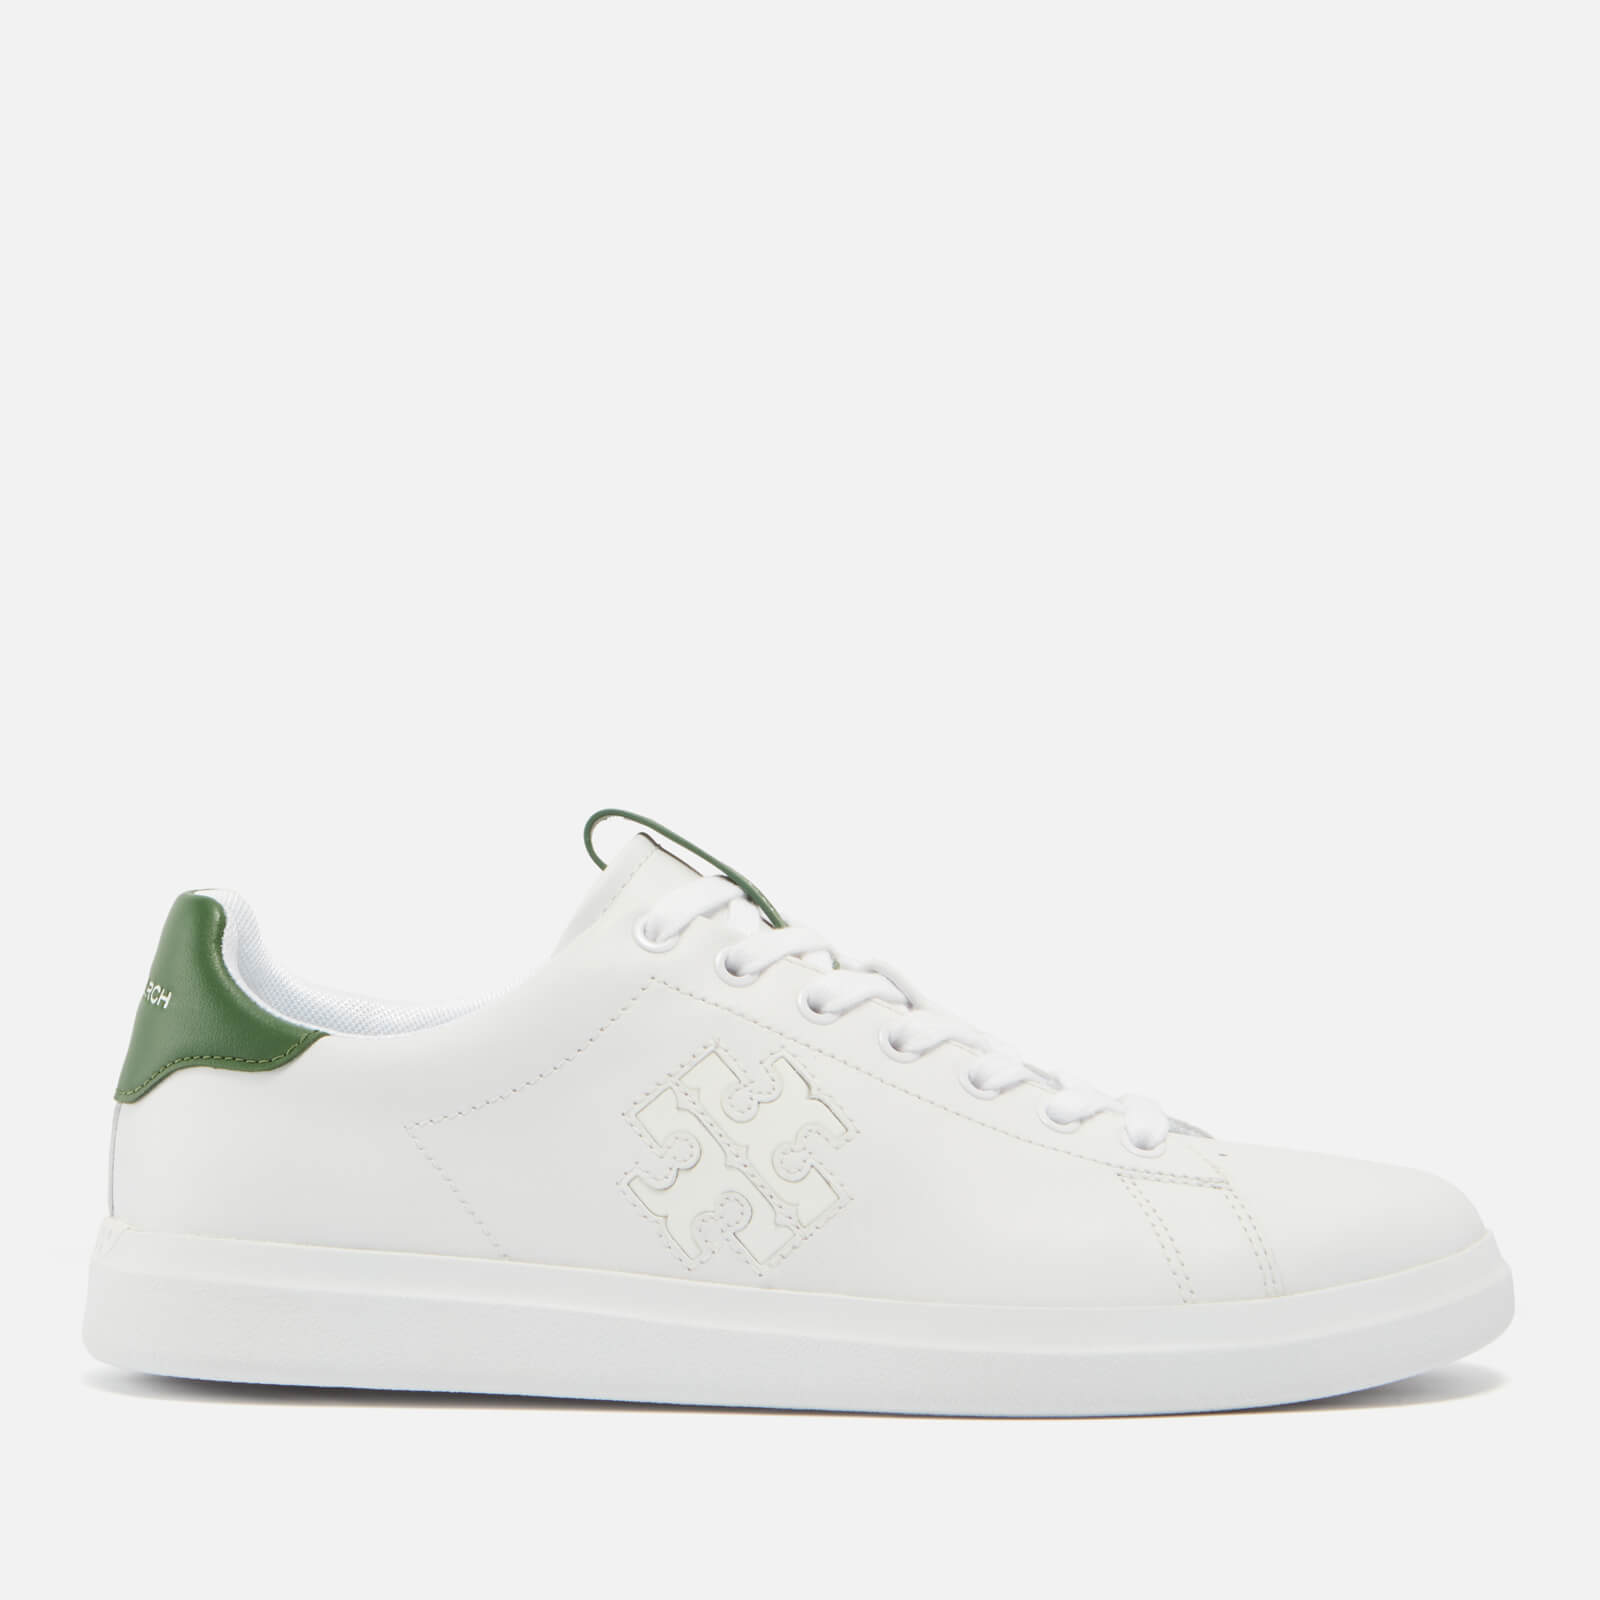 Tory Burch Women's Howell Leather Trainers - UK 4 von TORY BURCH